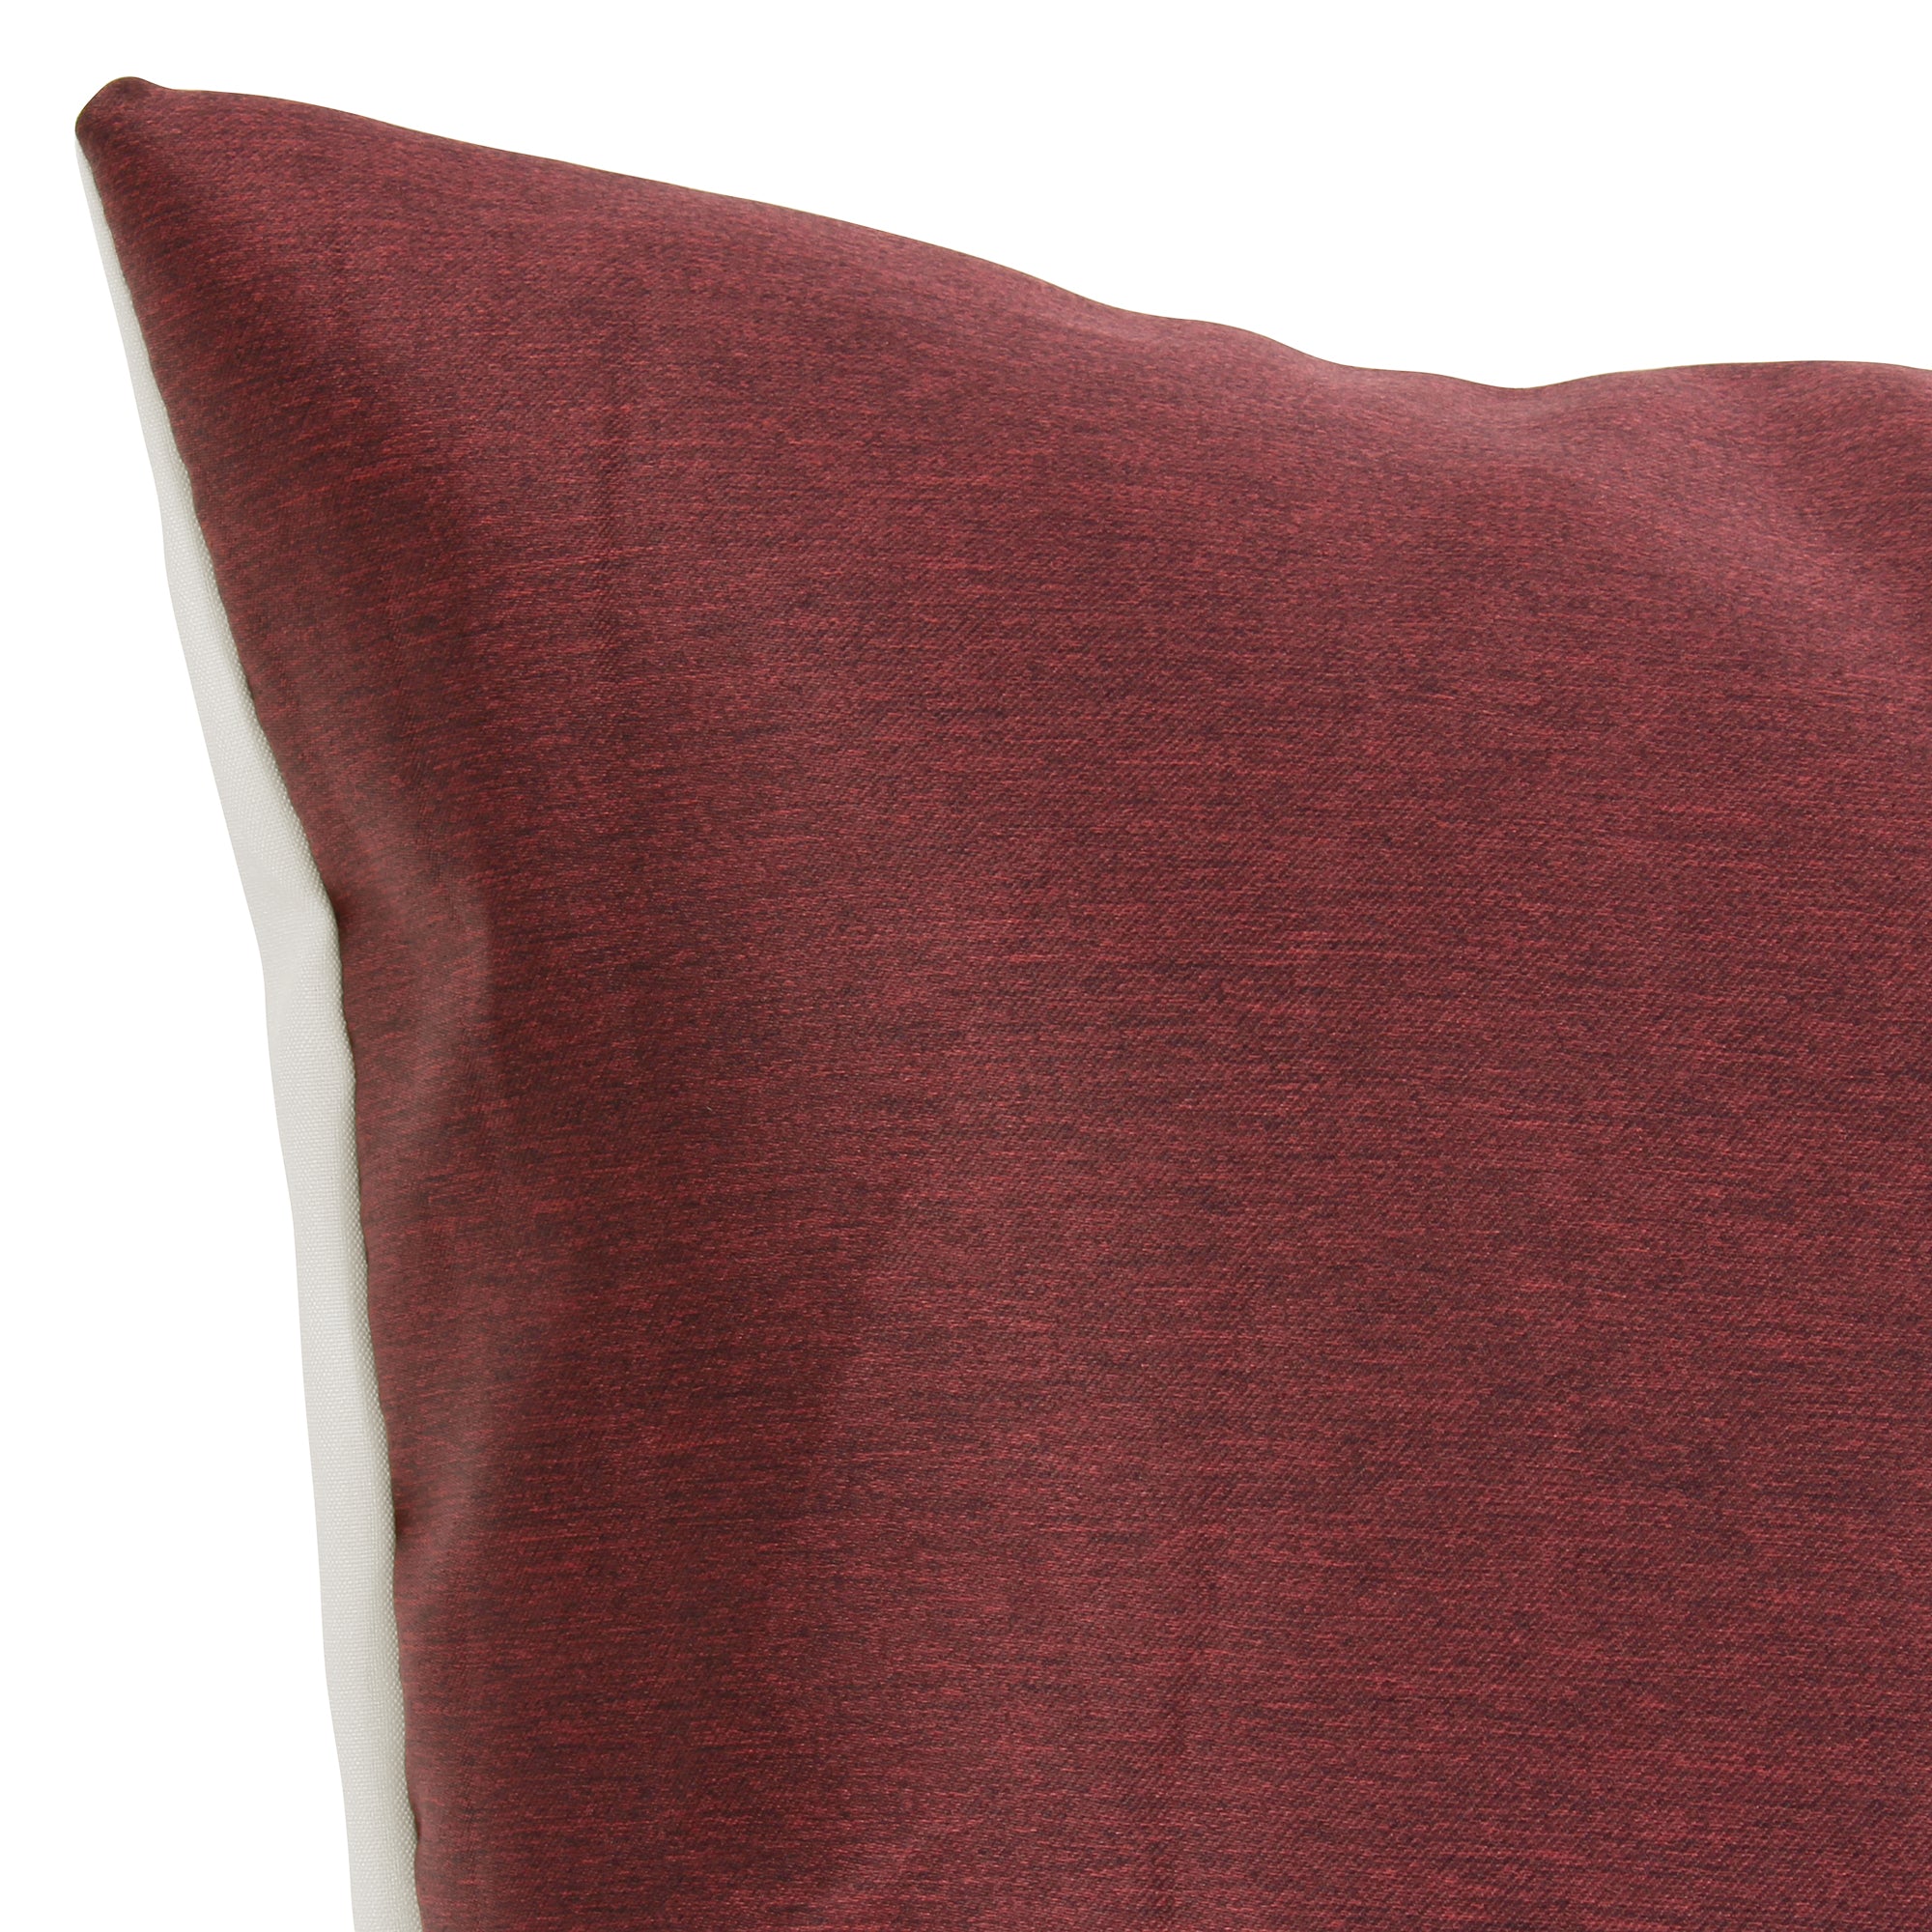 Story@Home Wine Plain Polyester 6 pcs of Alegra Cushion Covers